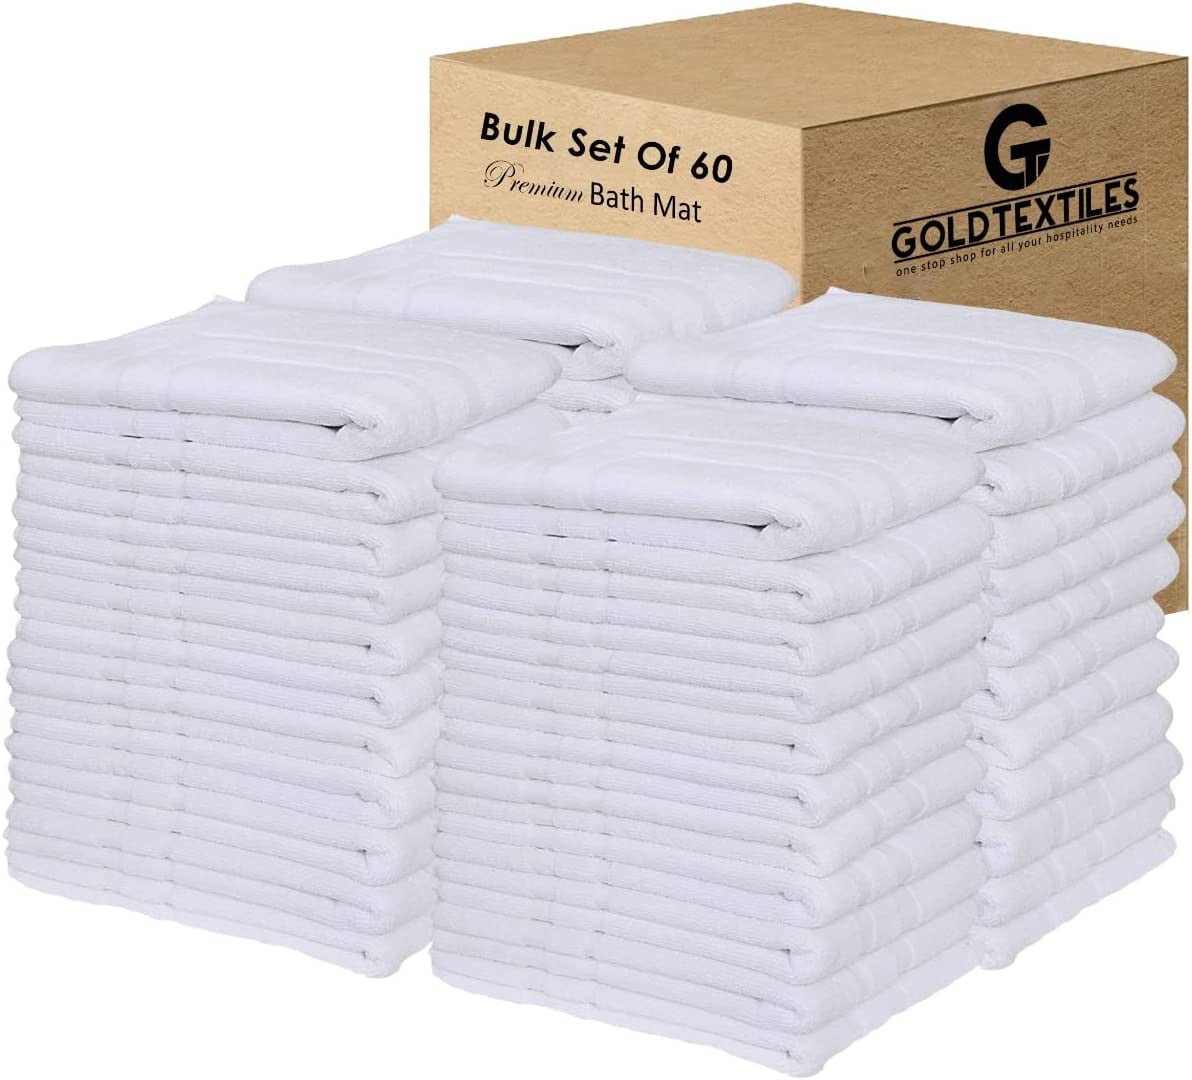 Gold Textiles 120 Pack White Economy Bath Terry Towel 24x50 inch Cotton  Blend Easy Care Home Spa